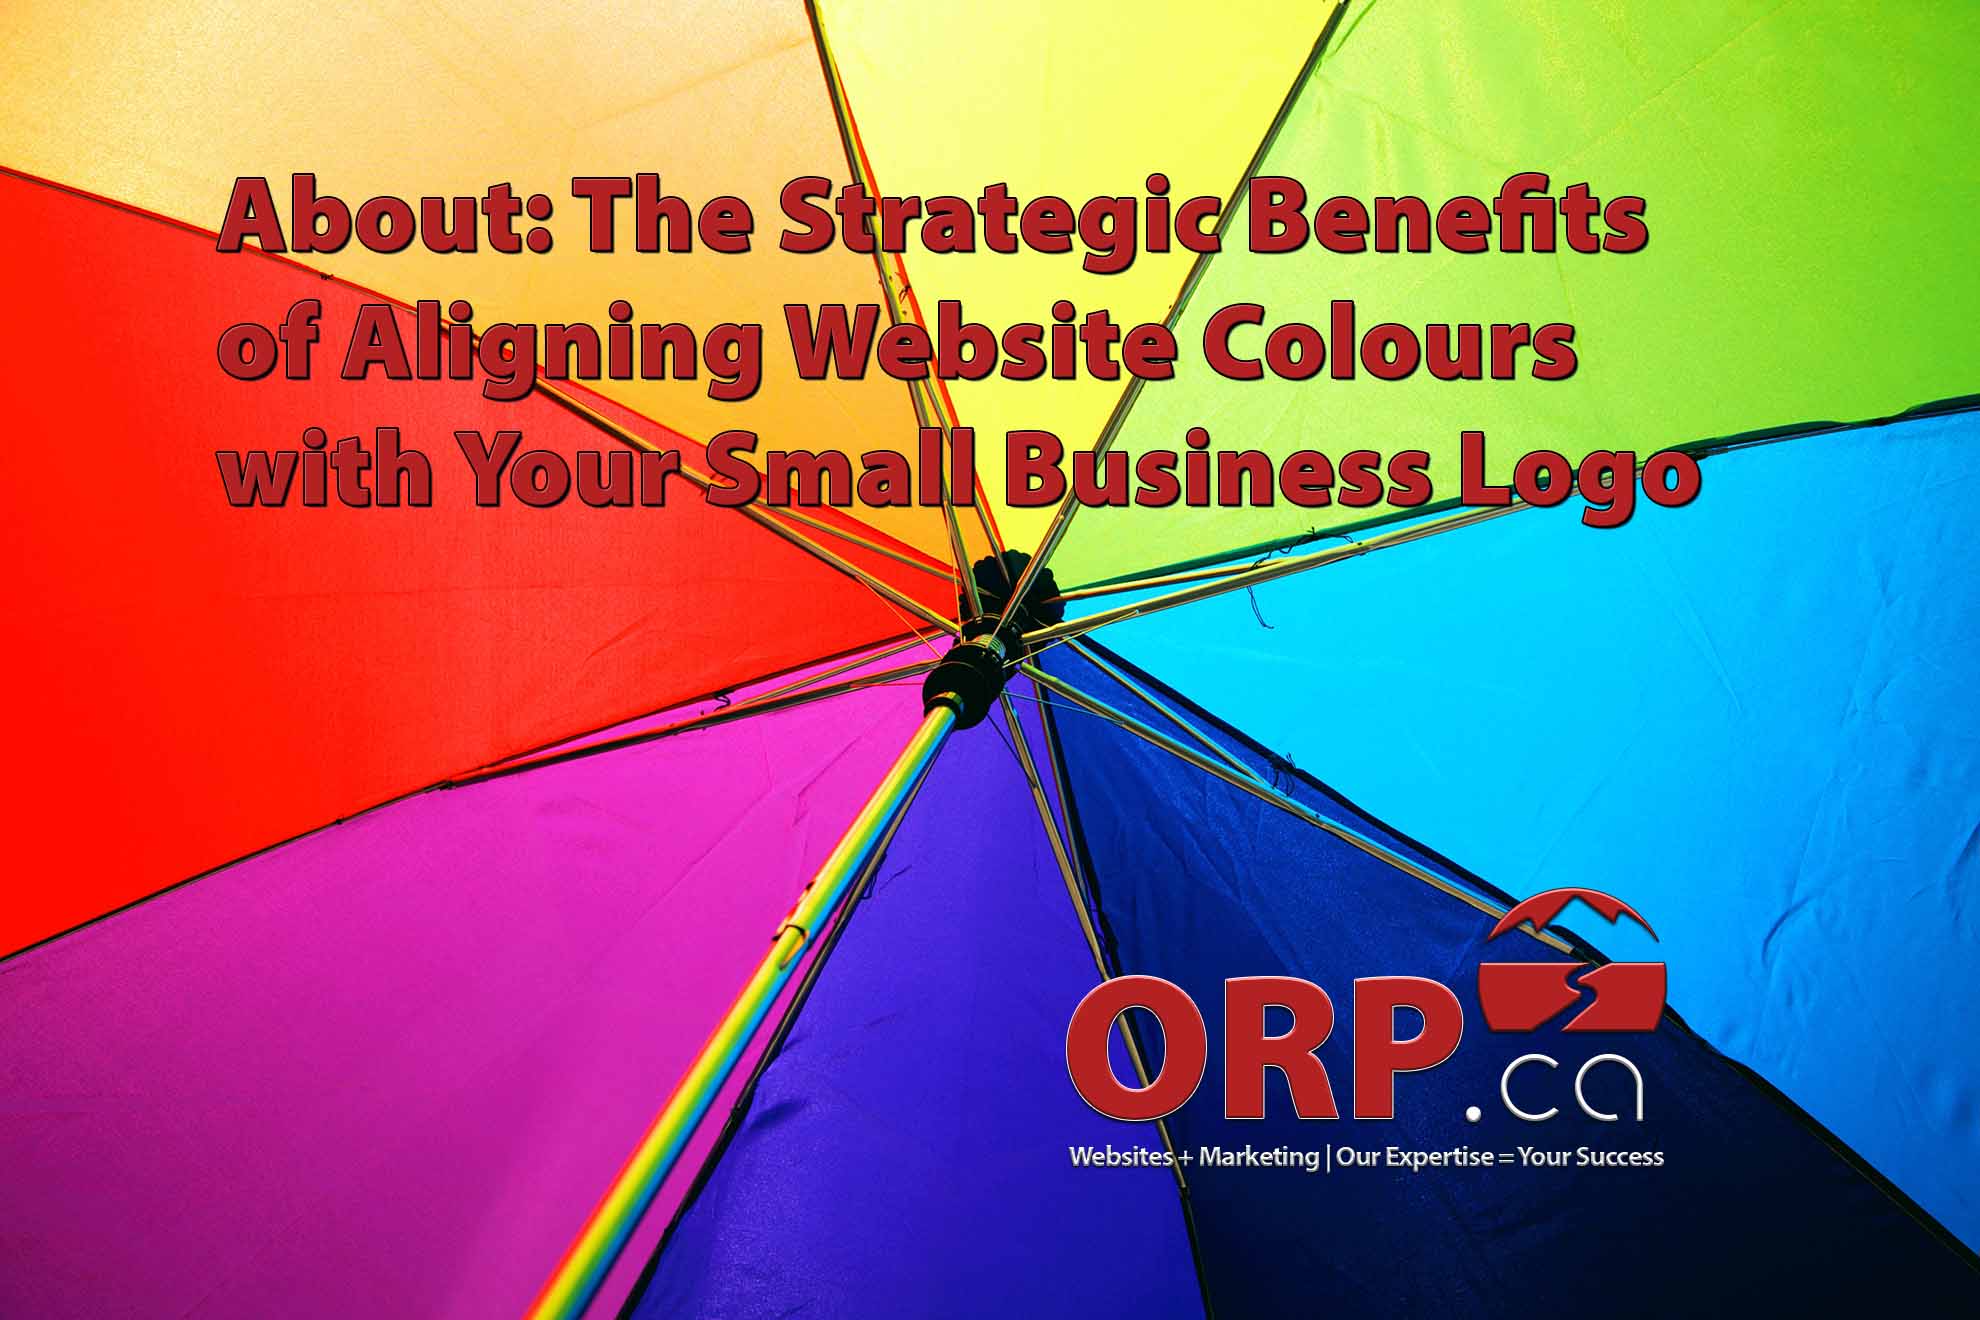 About: The Strategic Benefits of Aligning Website Colours with Your Small Business Logo - a small business digital marketing article from ORP.ca - Website design and support, digital marketing and consulting services.